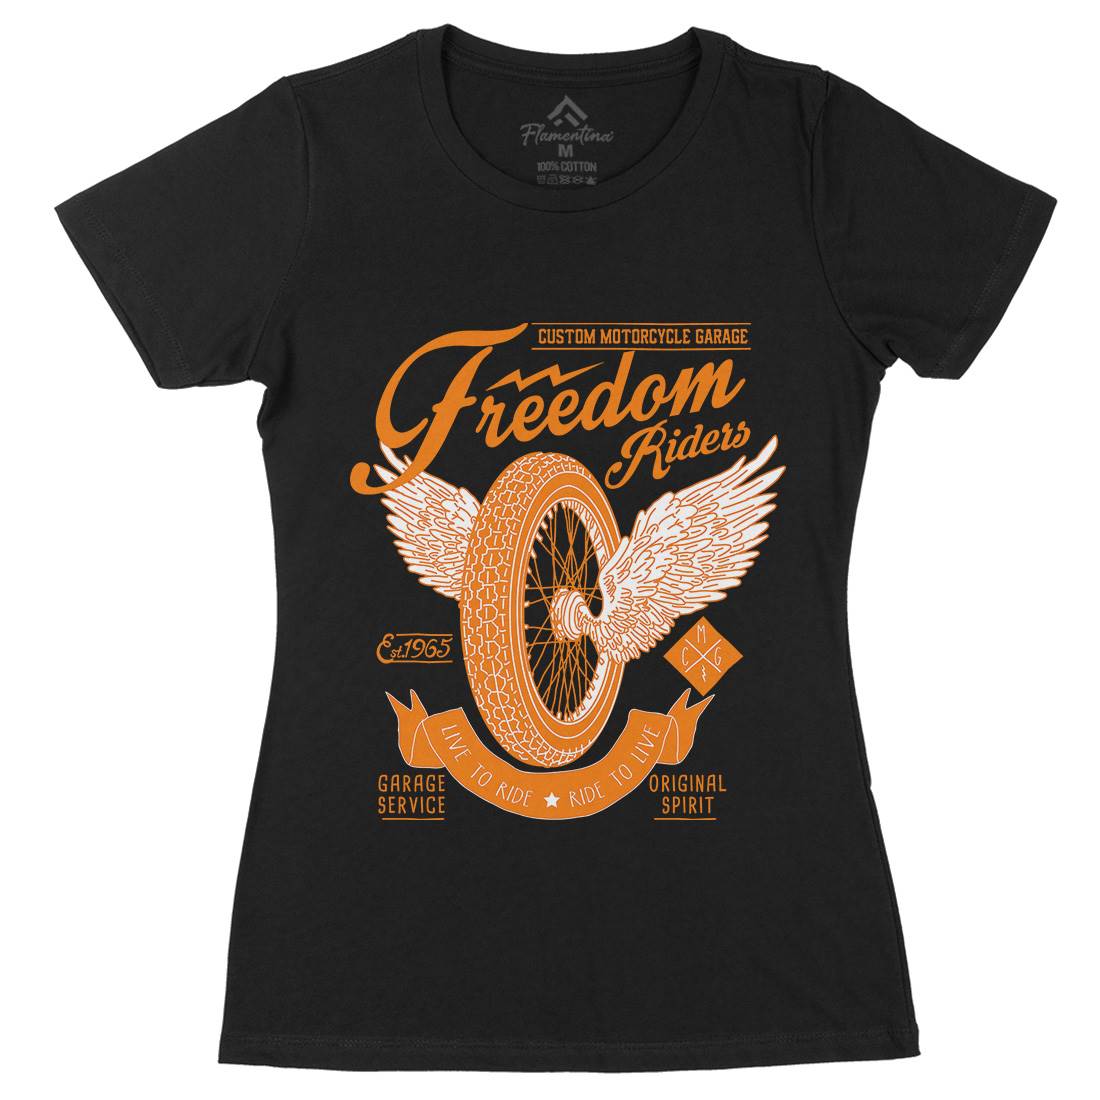 Freedom Riders Womens Organic Crew Neck T-Shirt Motorcycles A989